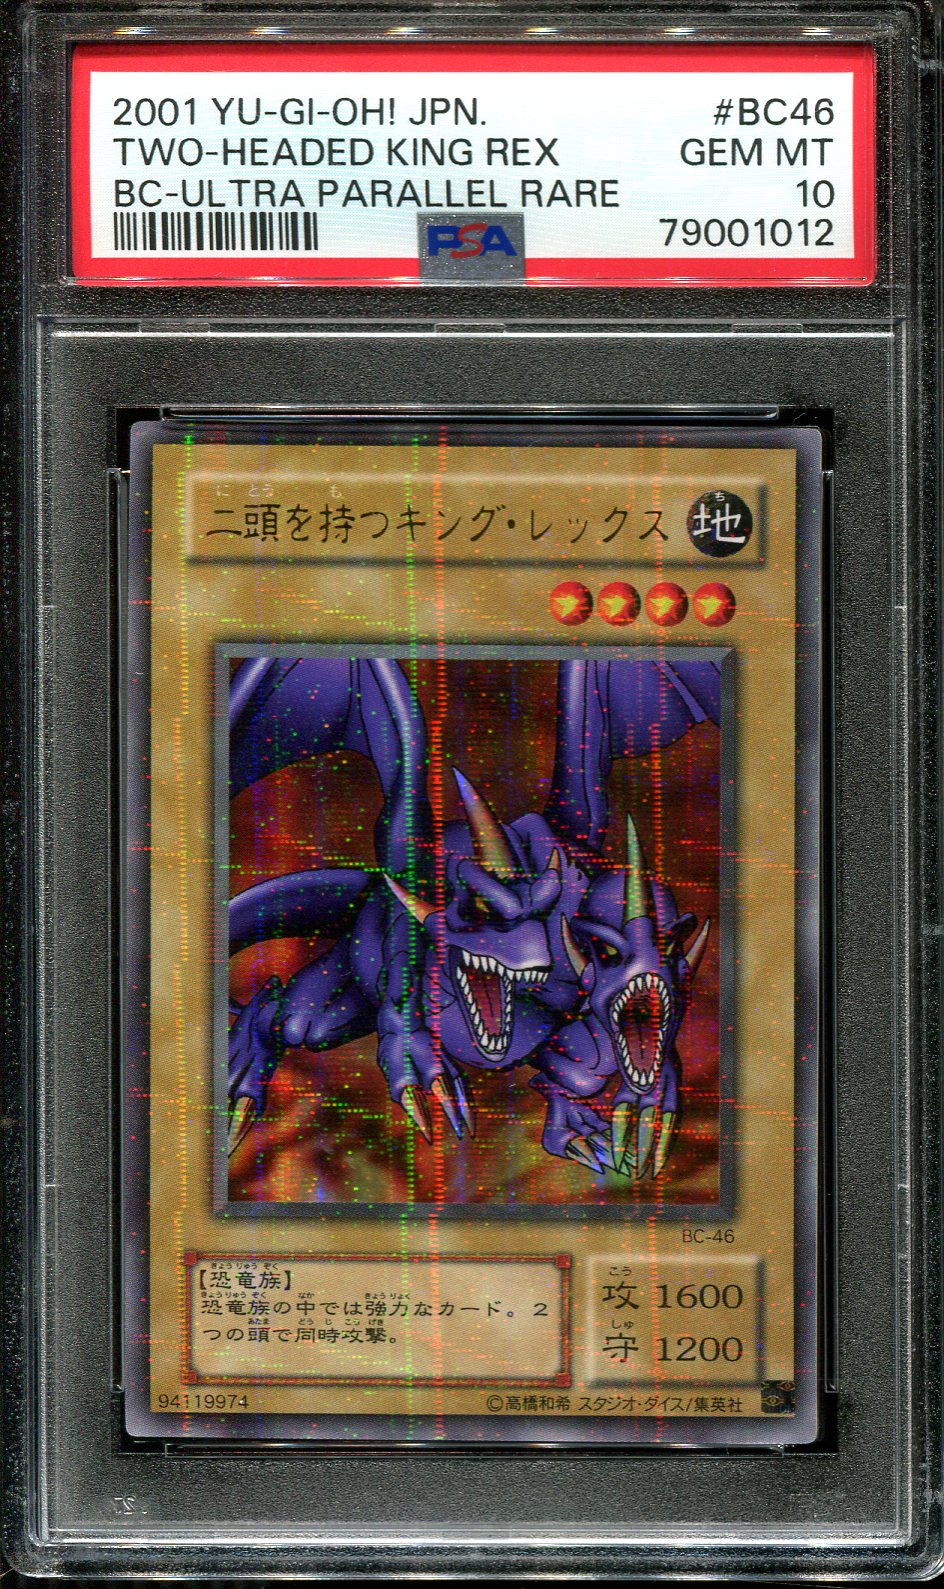 YUGIOH - PSA 10 - TWO-HEADED KING REX - BC-46 - BOOSTER CHRONICLES ULTRA PARALLEL RARE